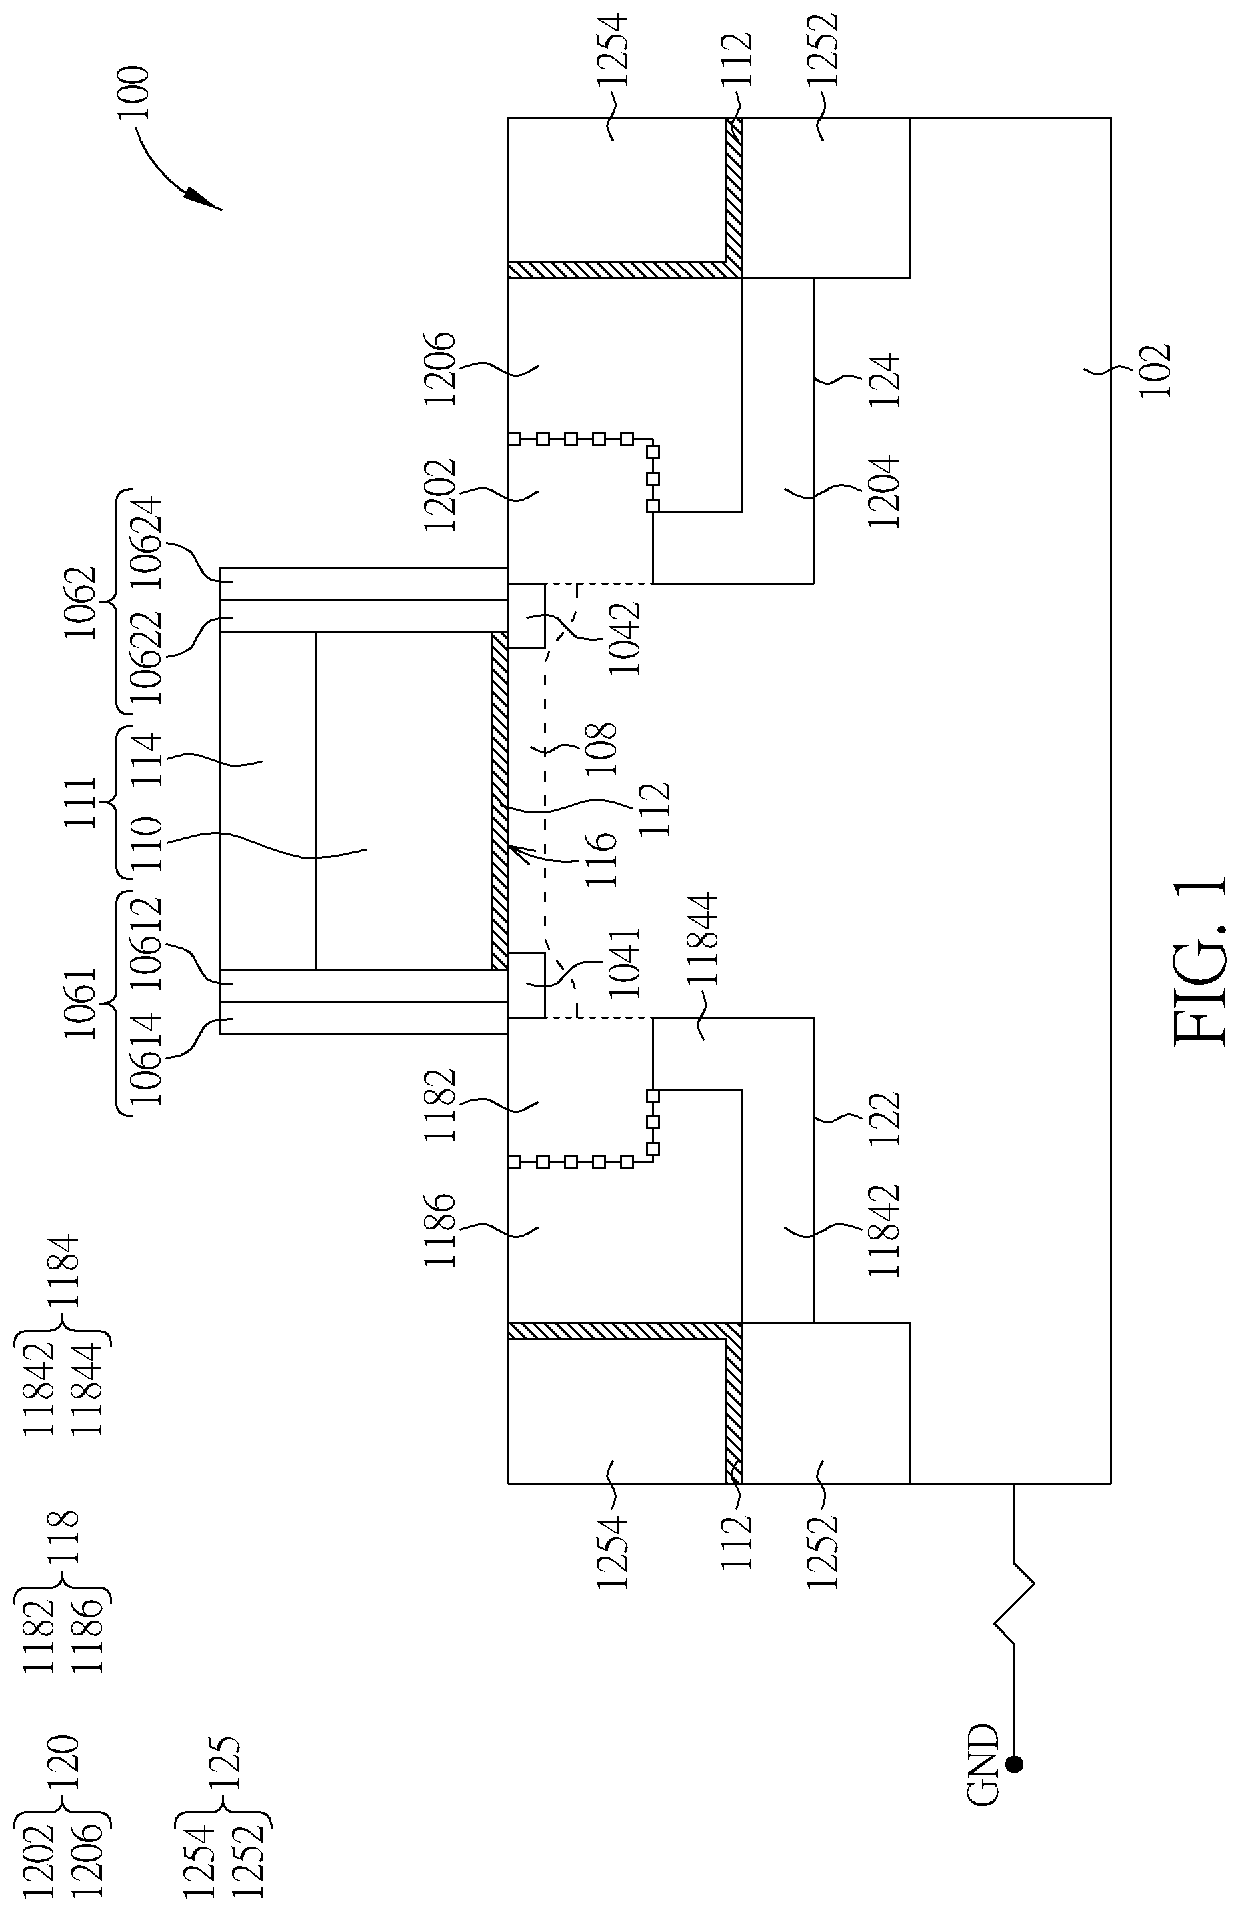 Transistor structure and related inverter